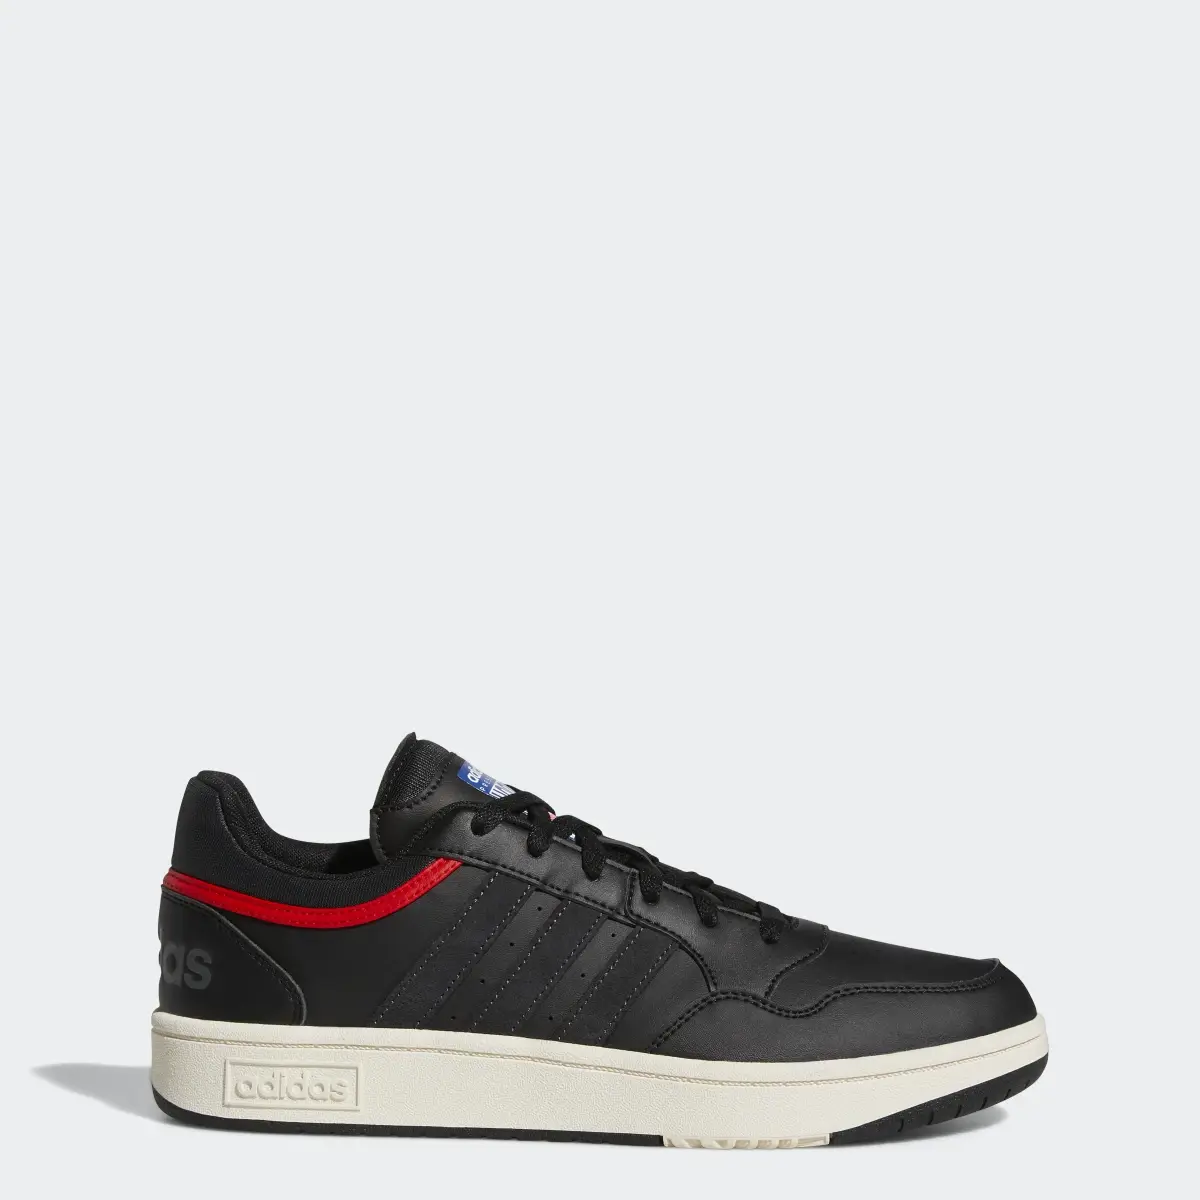 Adidas Hoops 3.0 Low Classic Vintage Schuh. 1